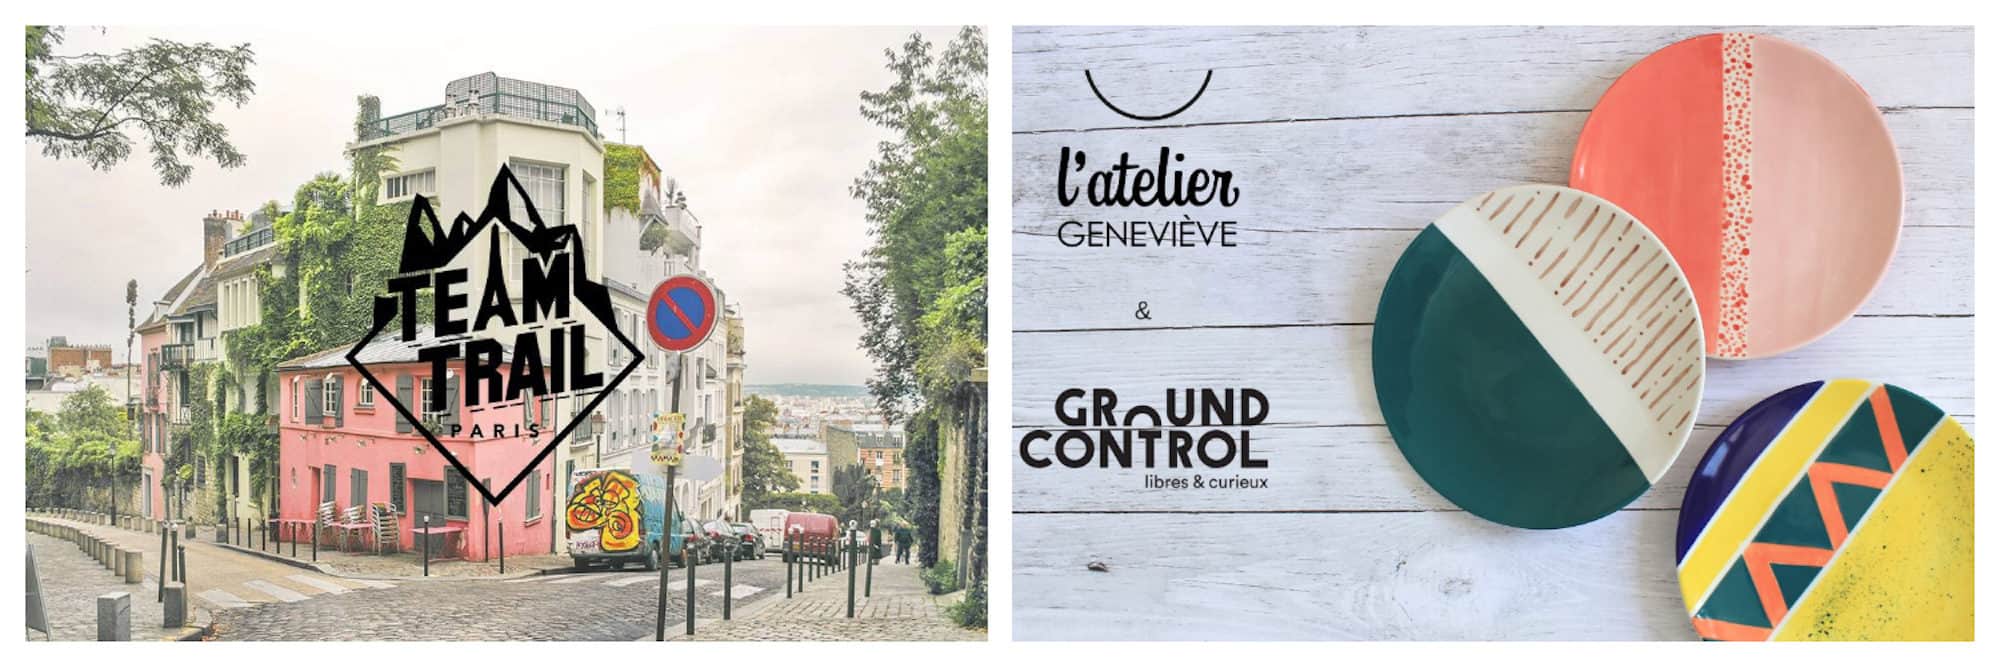 La Maison Rose in Montmartre is part of Team Trail's Paris itineraries around Montmartre, a great way to spend December in Paris (left). Something else to do in Paris this winter is a ceramics workshop at bar and art hub Ground Control (right). 